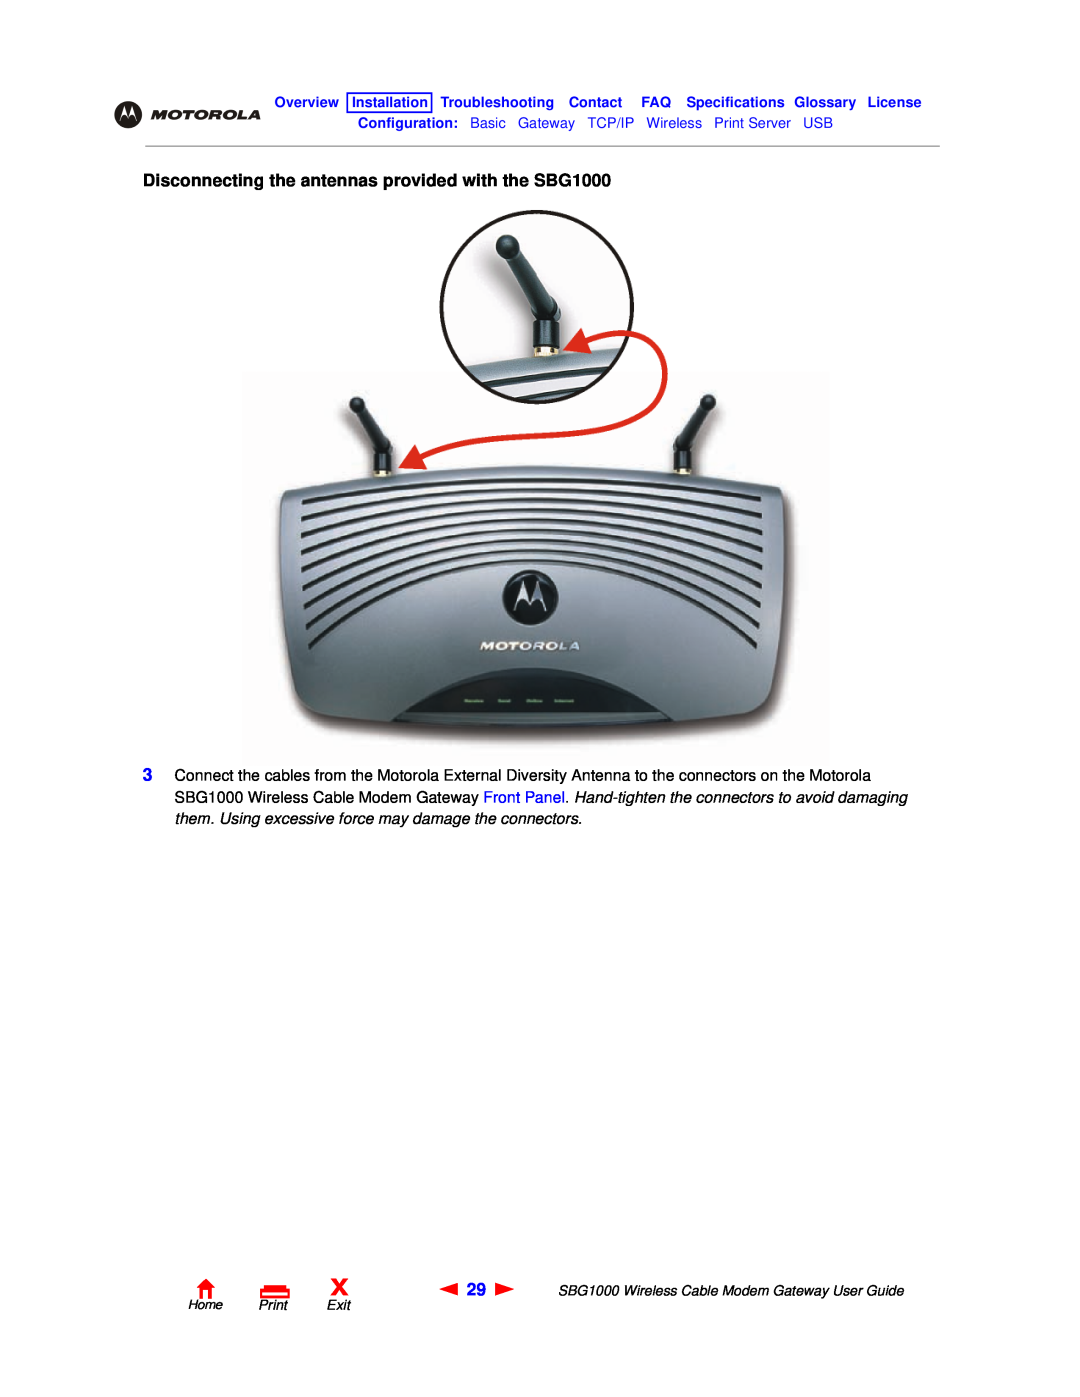 Motorola manual Disconnecting the antennas provided with the SBG1000 